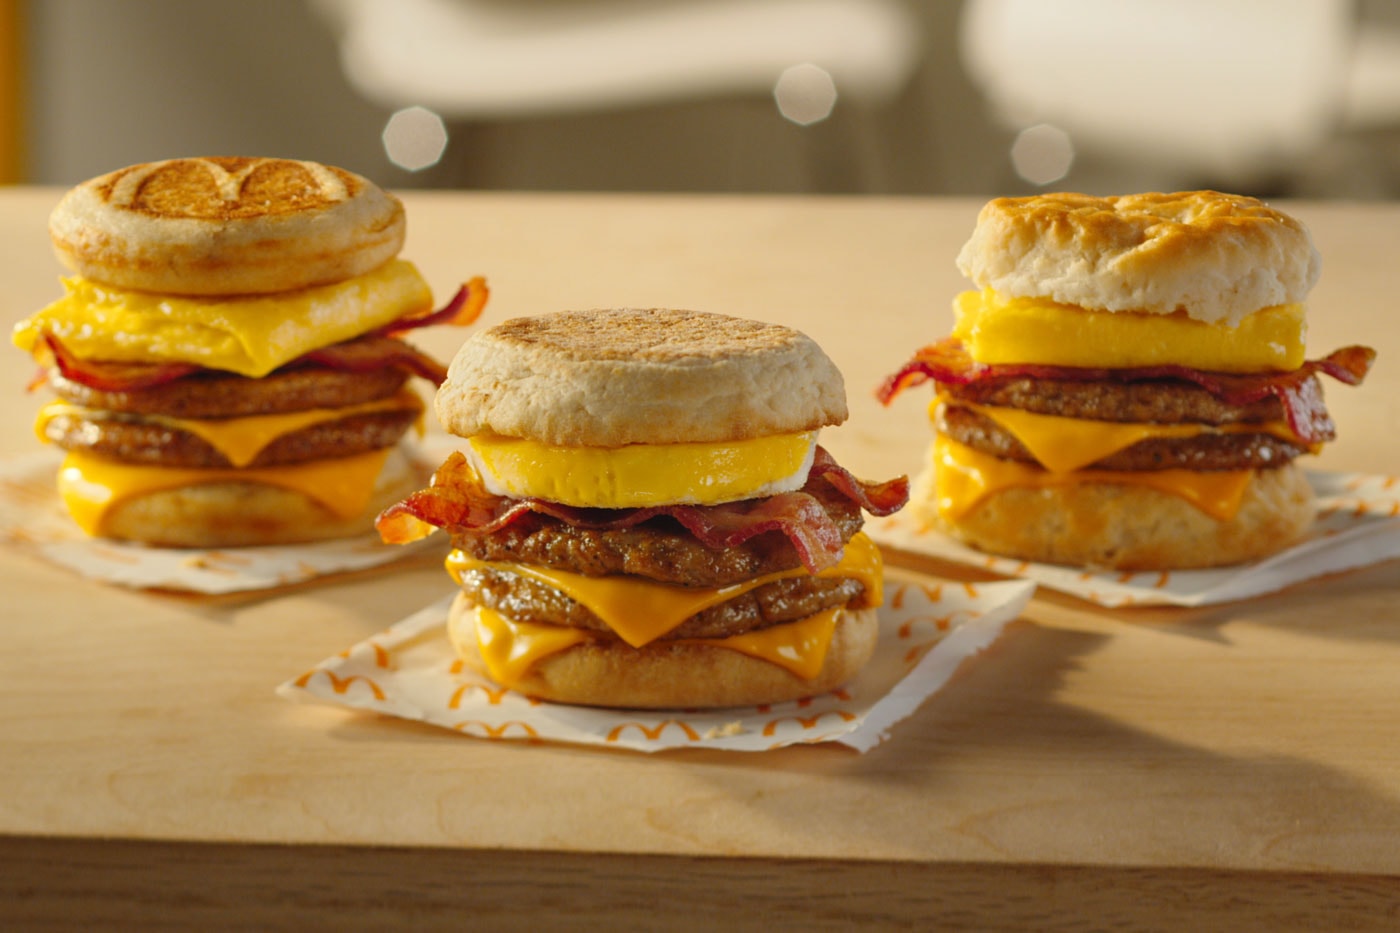 Mcdonalds Triple Breakfast Stacks Announcement Sandwiches cheese sausage patties bacon egg McMuffin bun biscuit McGriddles cakes  